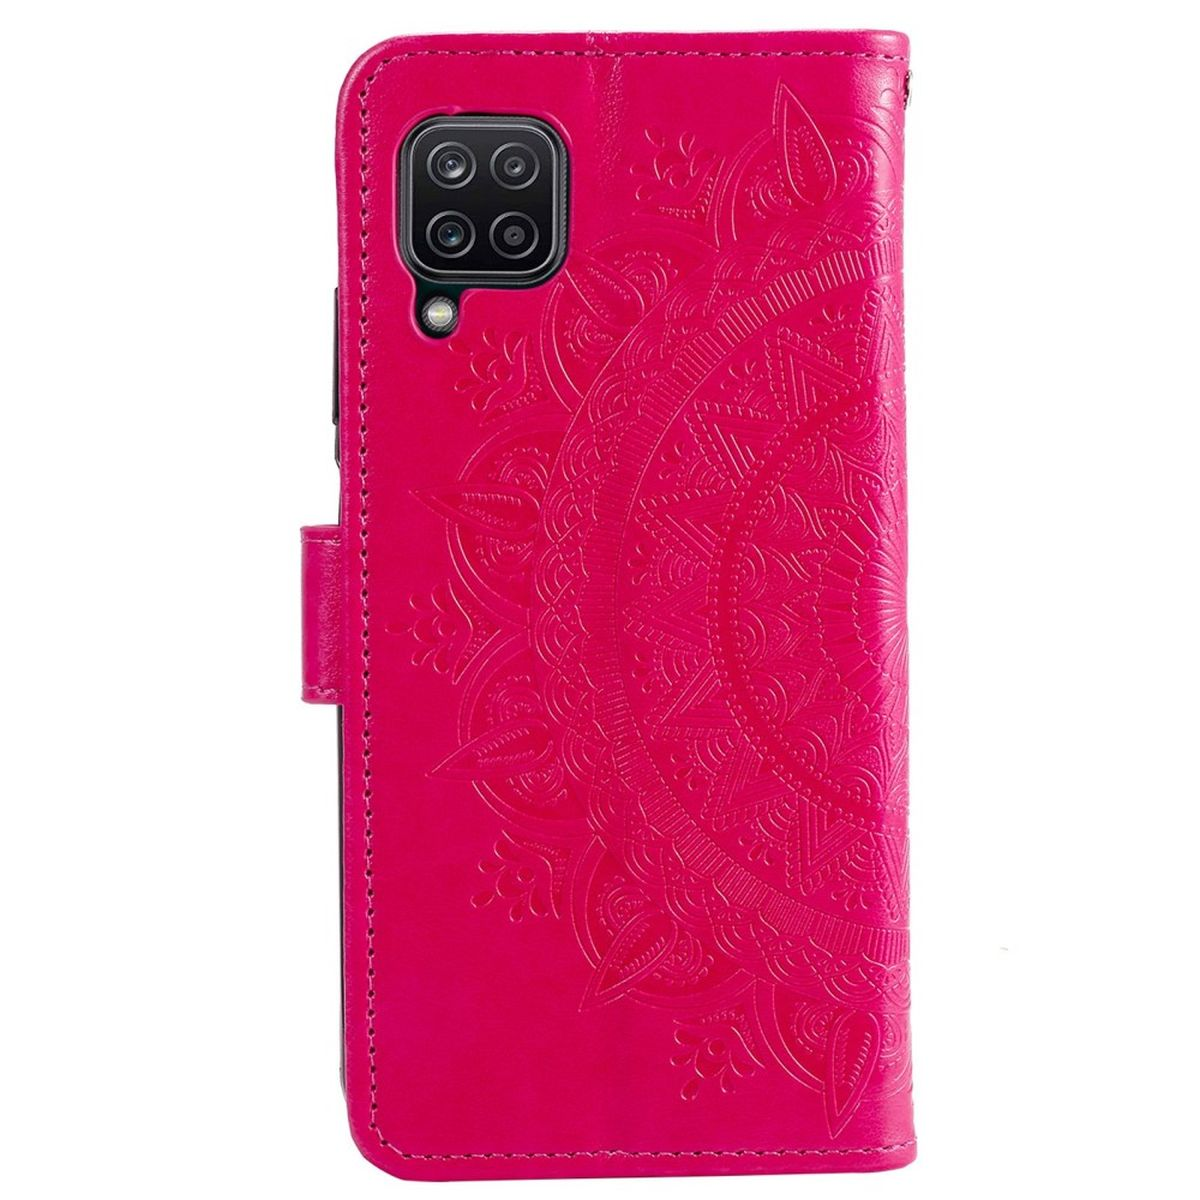 COVERKINGZ Samsung, Bookcover, Mandala Klapphülle mit Galaxy Pink 5G, Muster, M33